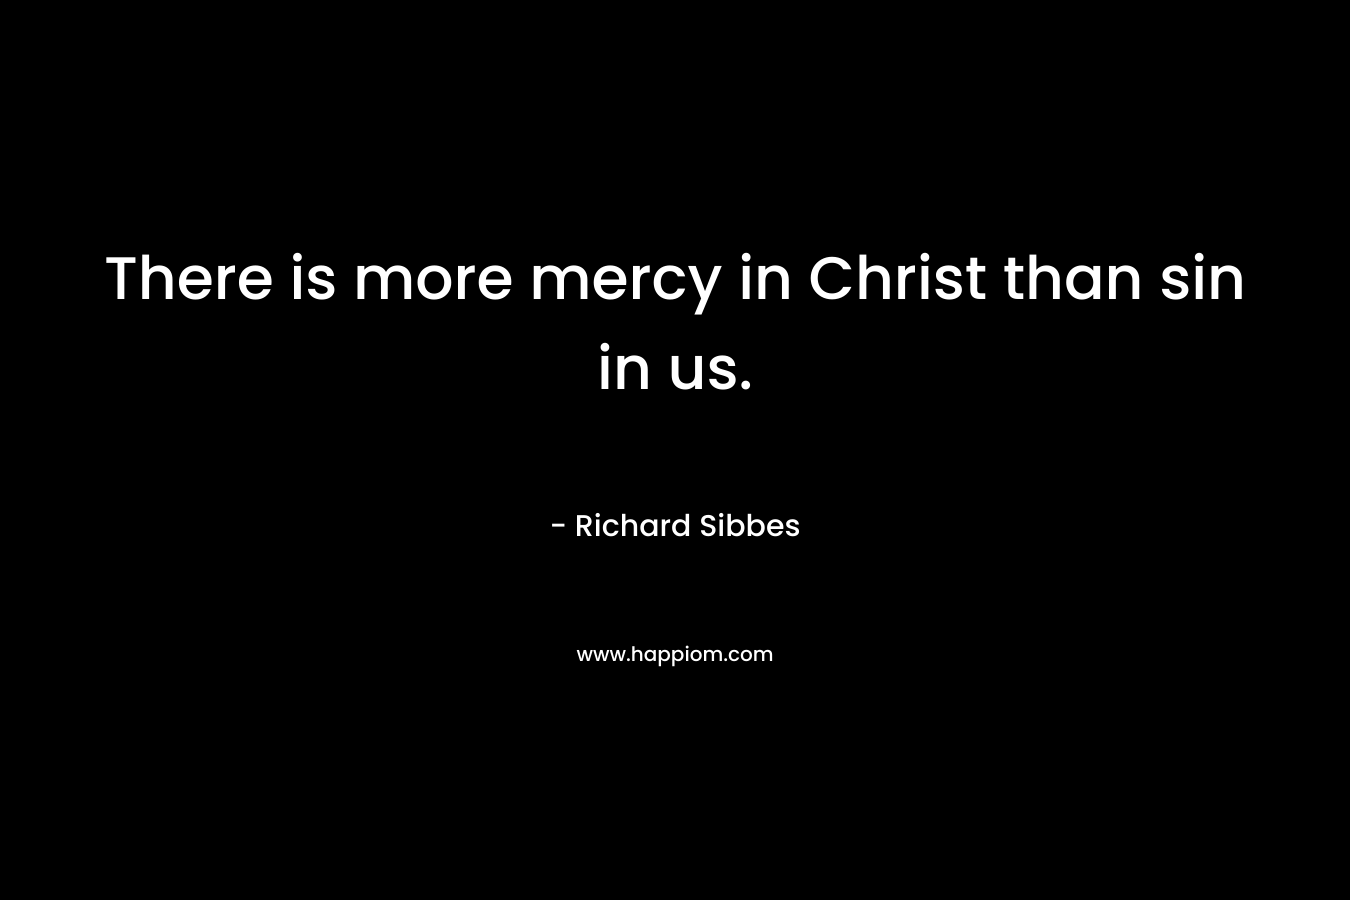 There is more mercy in Christ than sin in us.